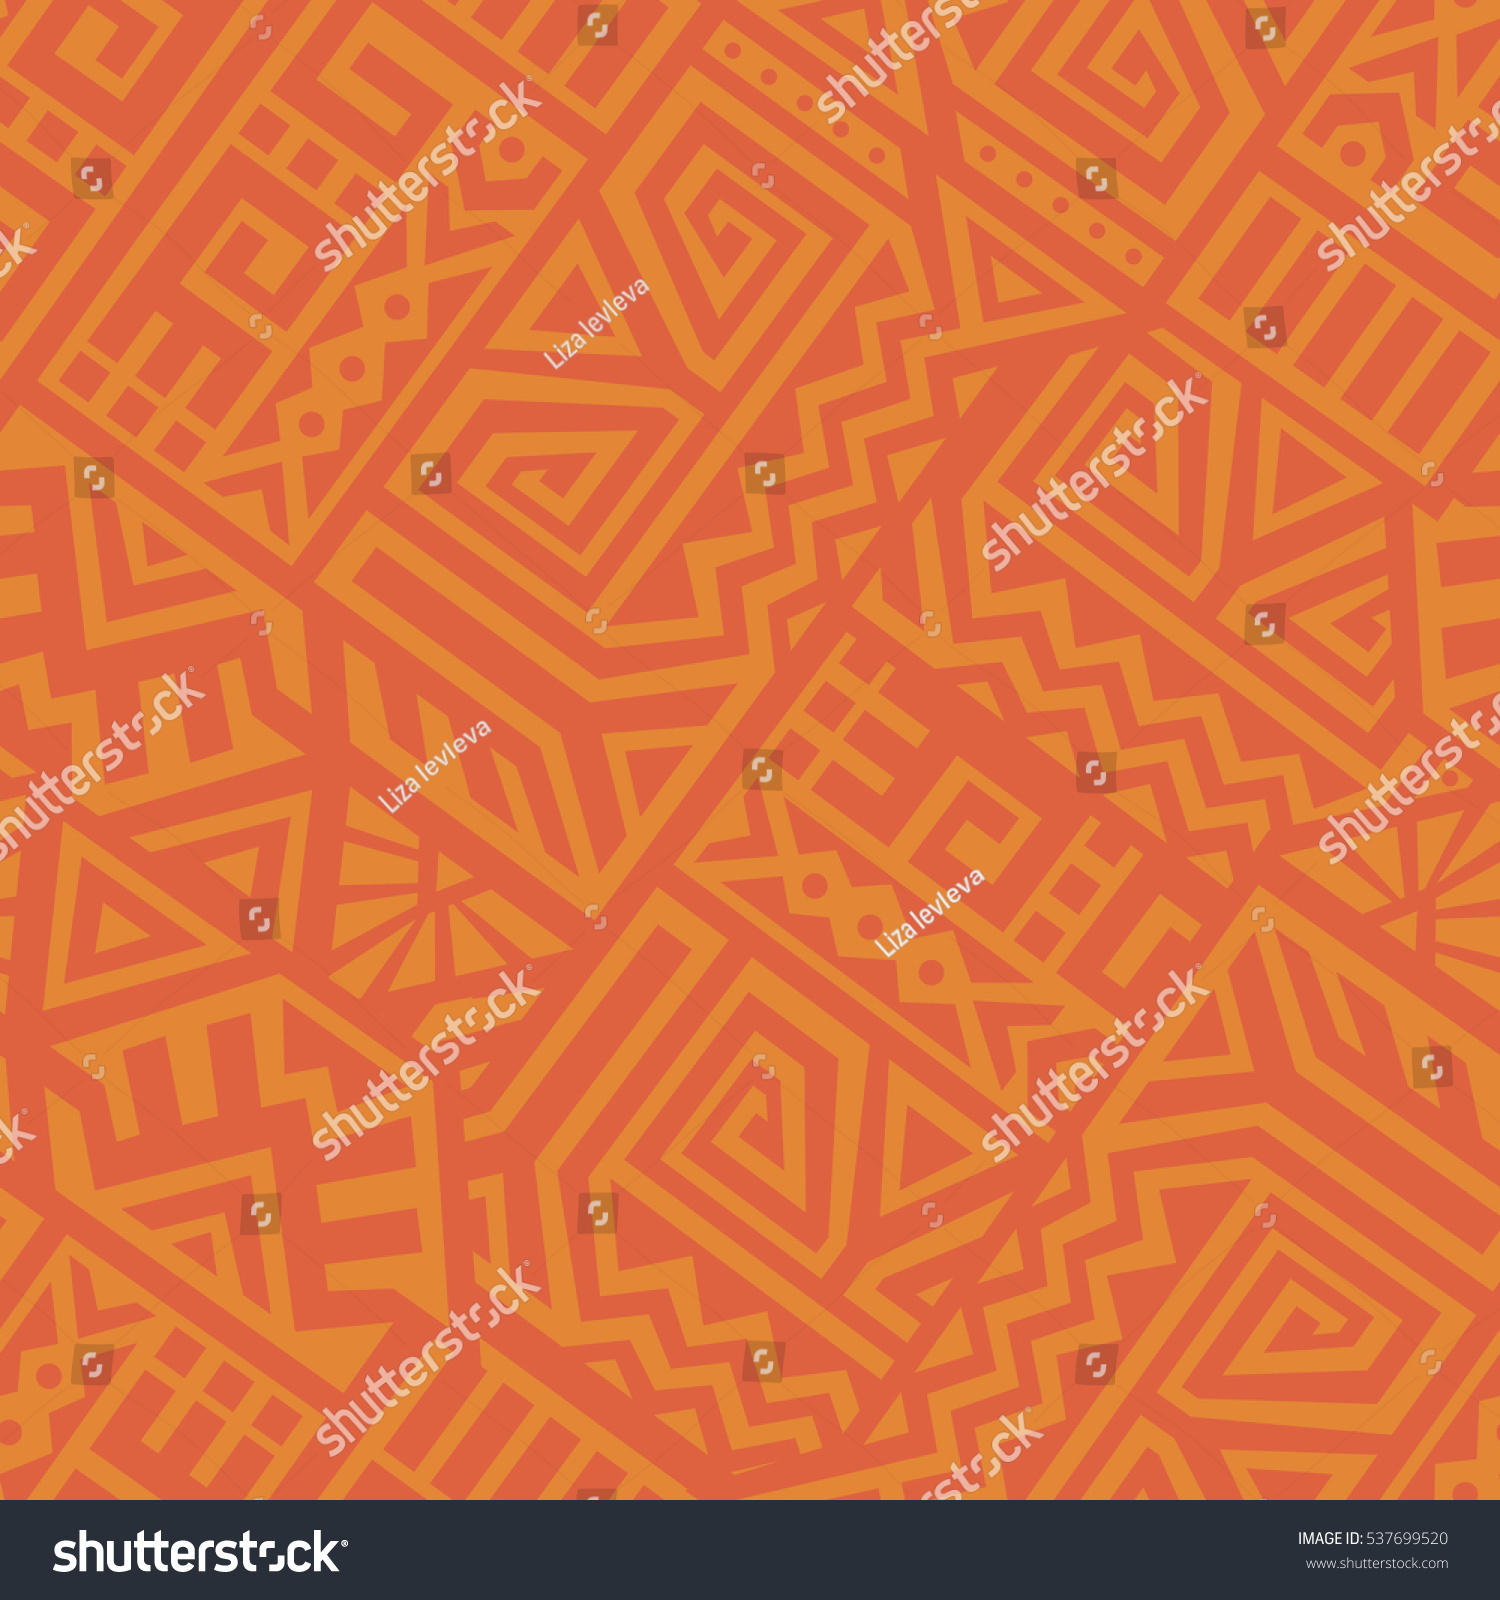 SVG of Unique Geometric Vector Seamless Pattern made in ethnic style. Aztec textile print. Perfect for site backgrounds, wrapping paper and fabric design. svg